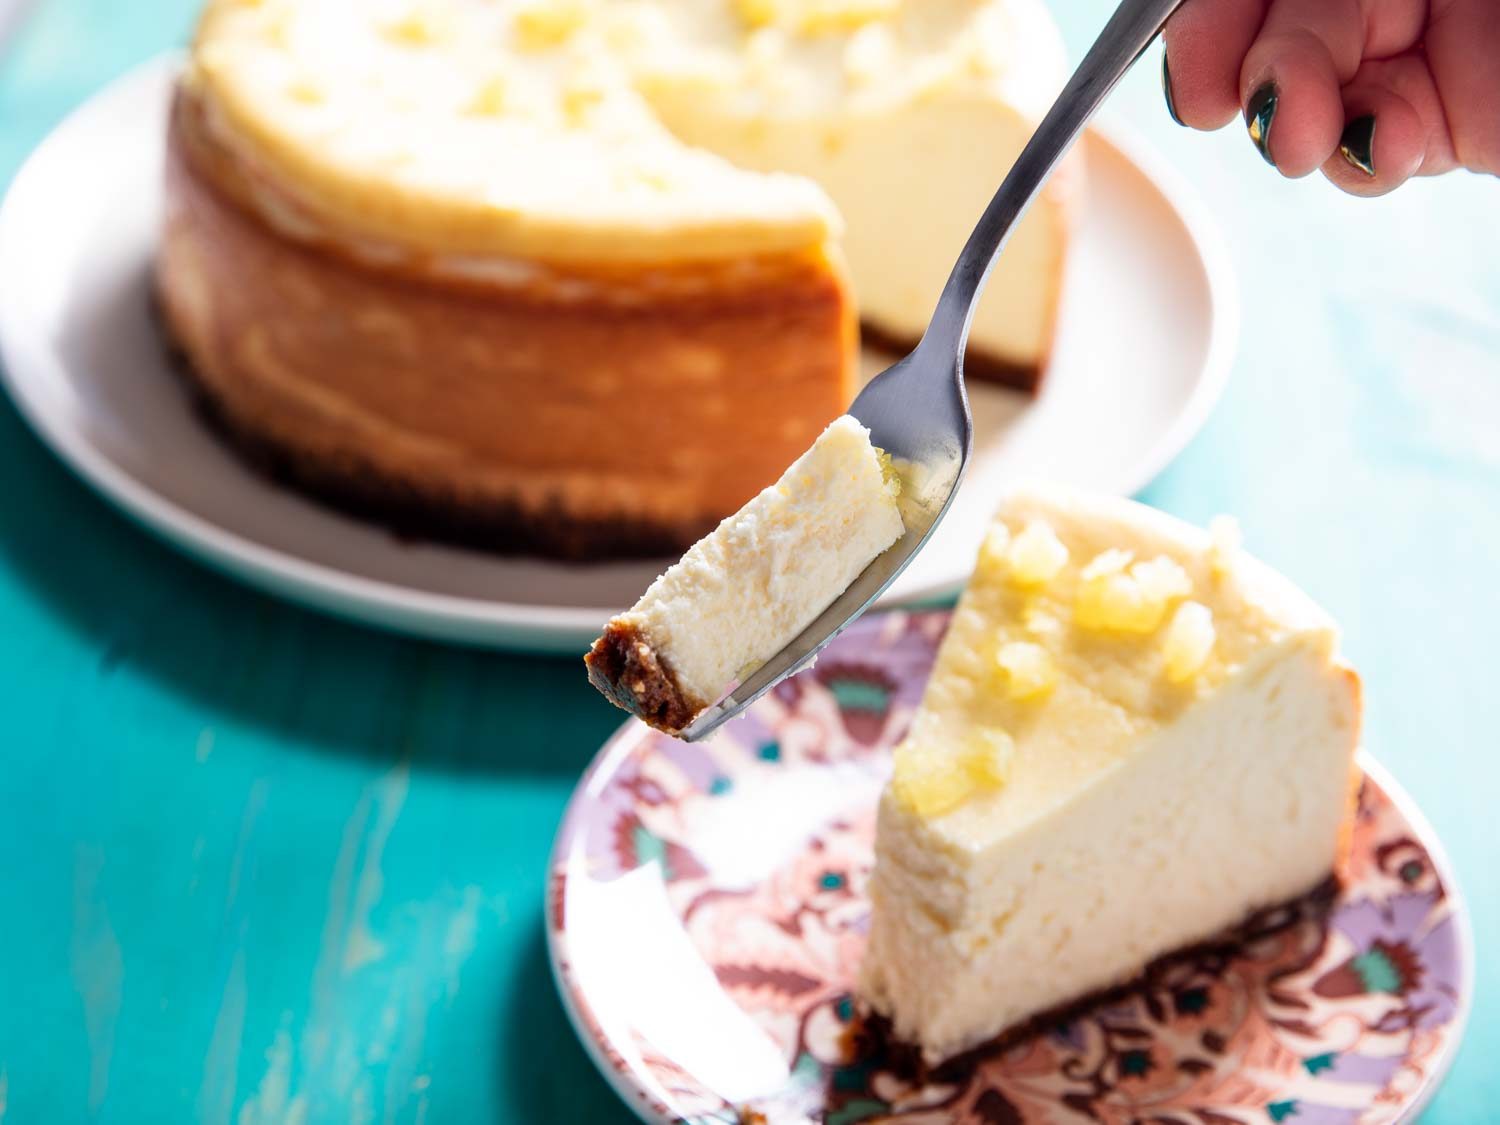 Taking a bite from a slice of lemon cheesecake